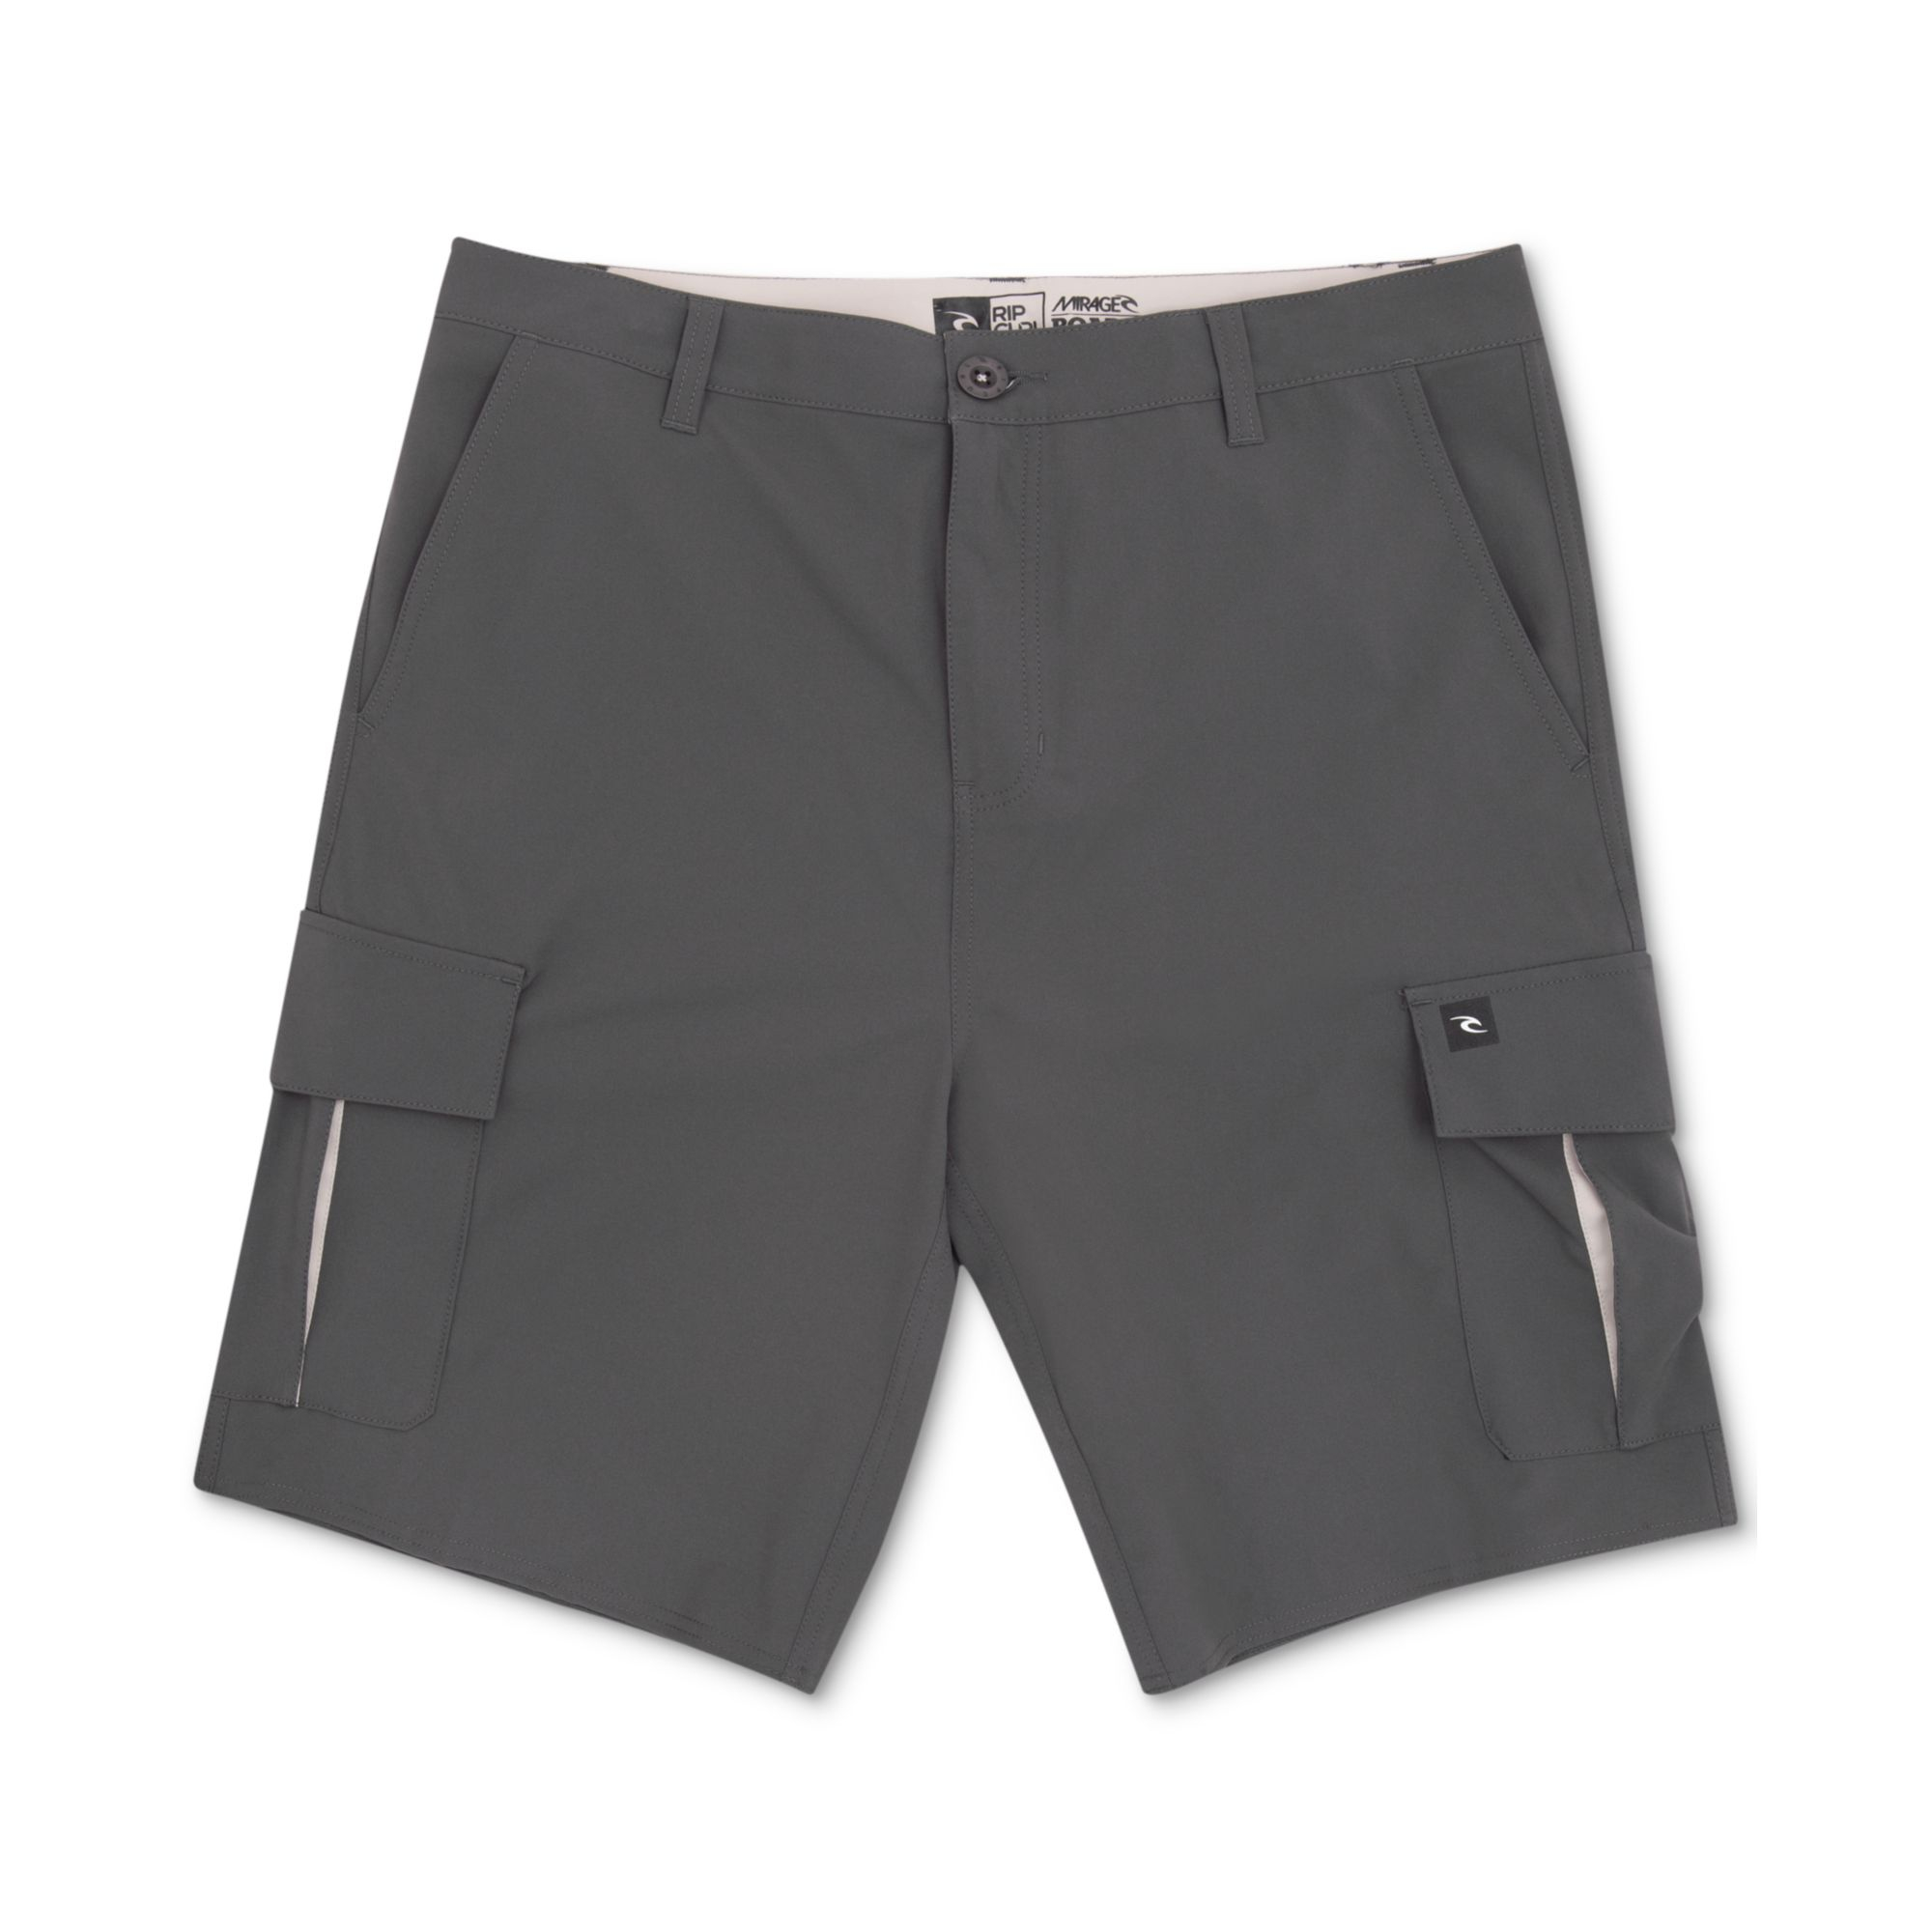 Rip Curl Mirage Cargo Hybrid Shorts in Grey (Gray) for Men - Lyst